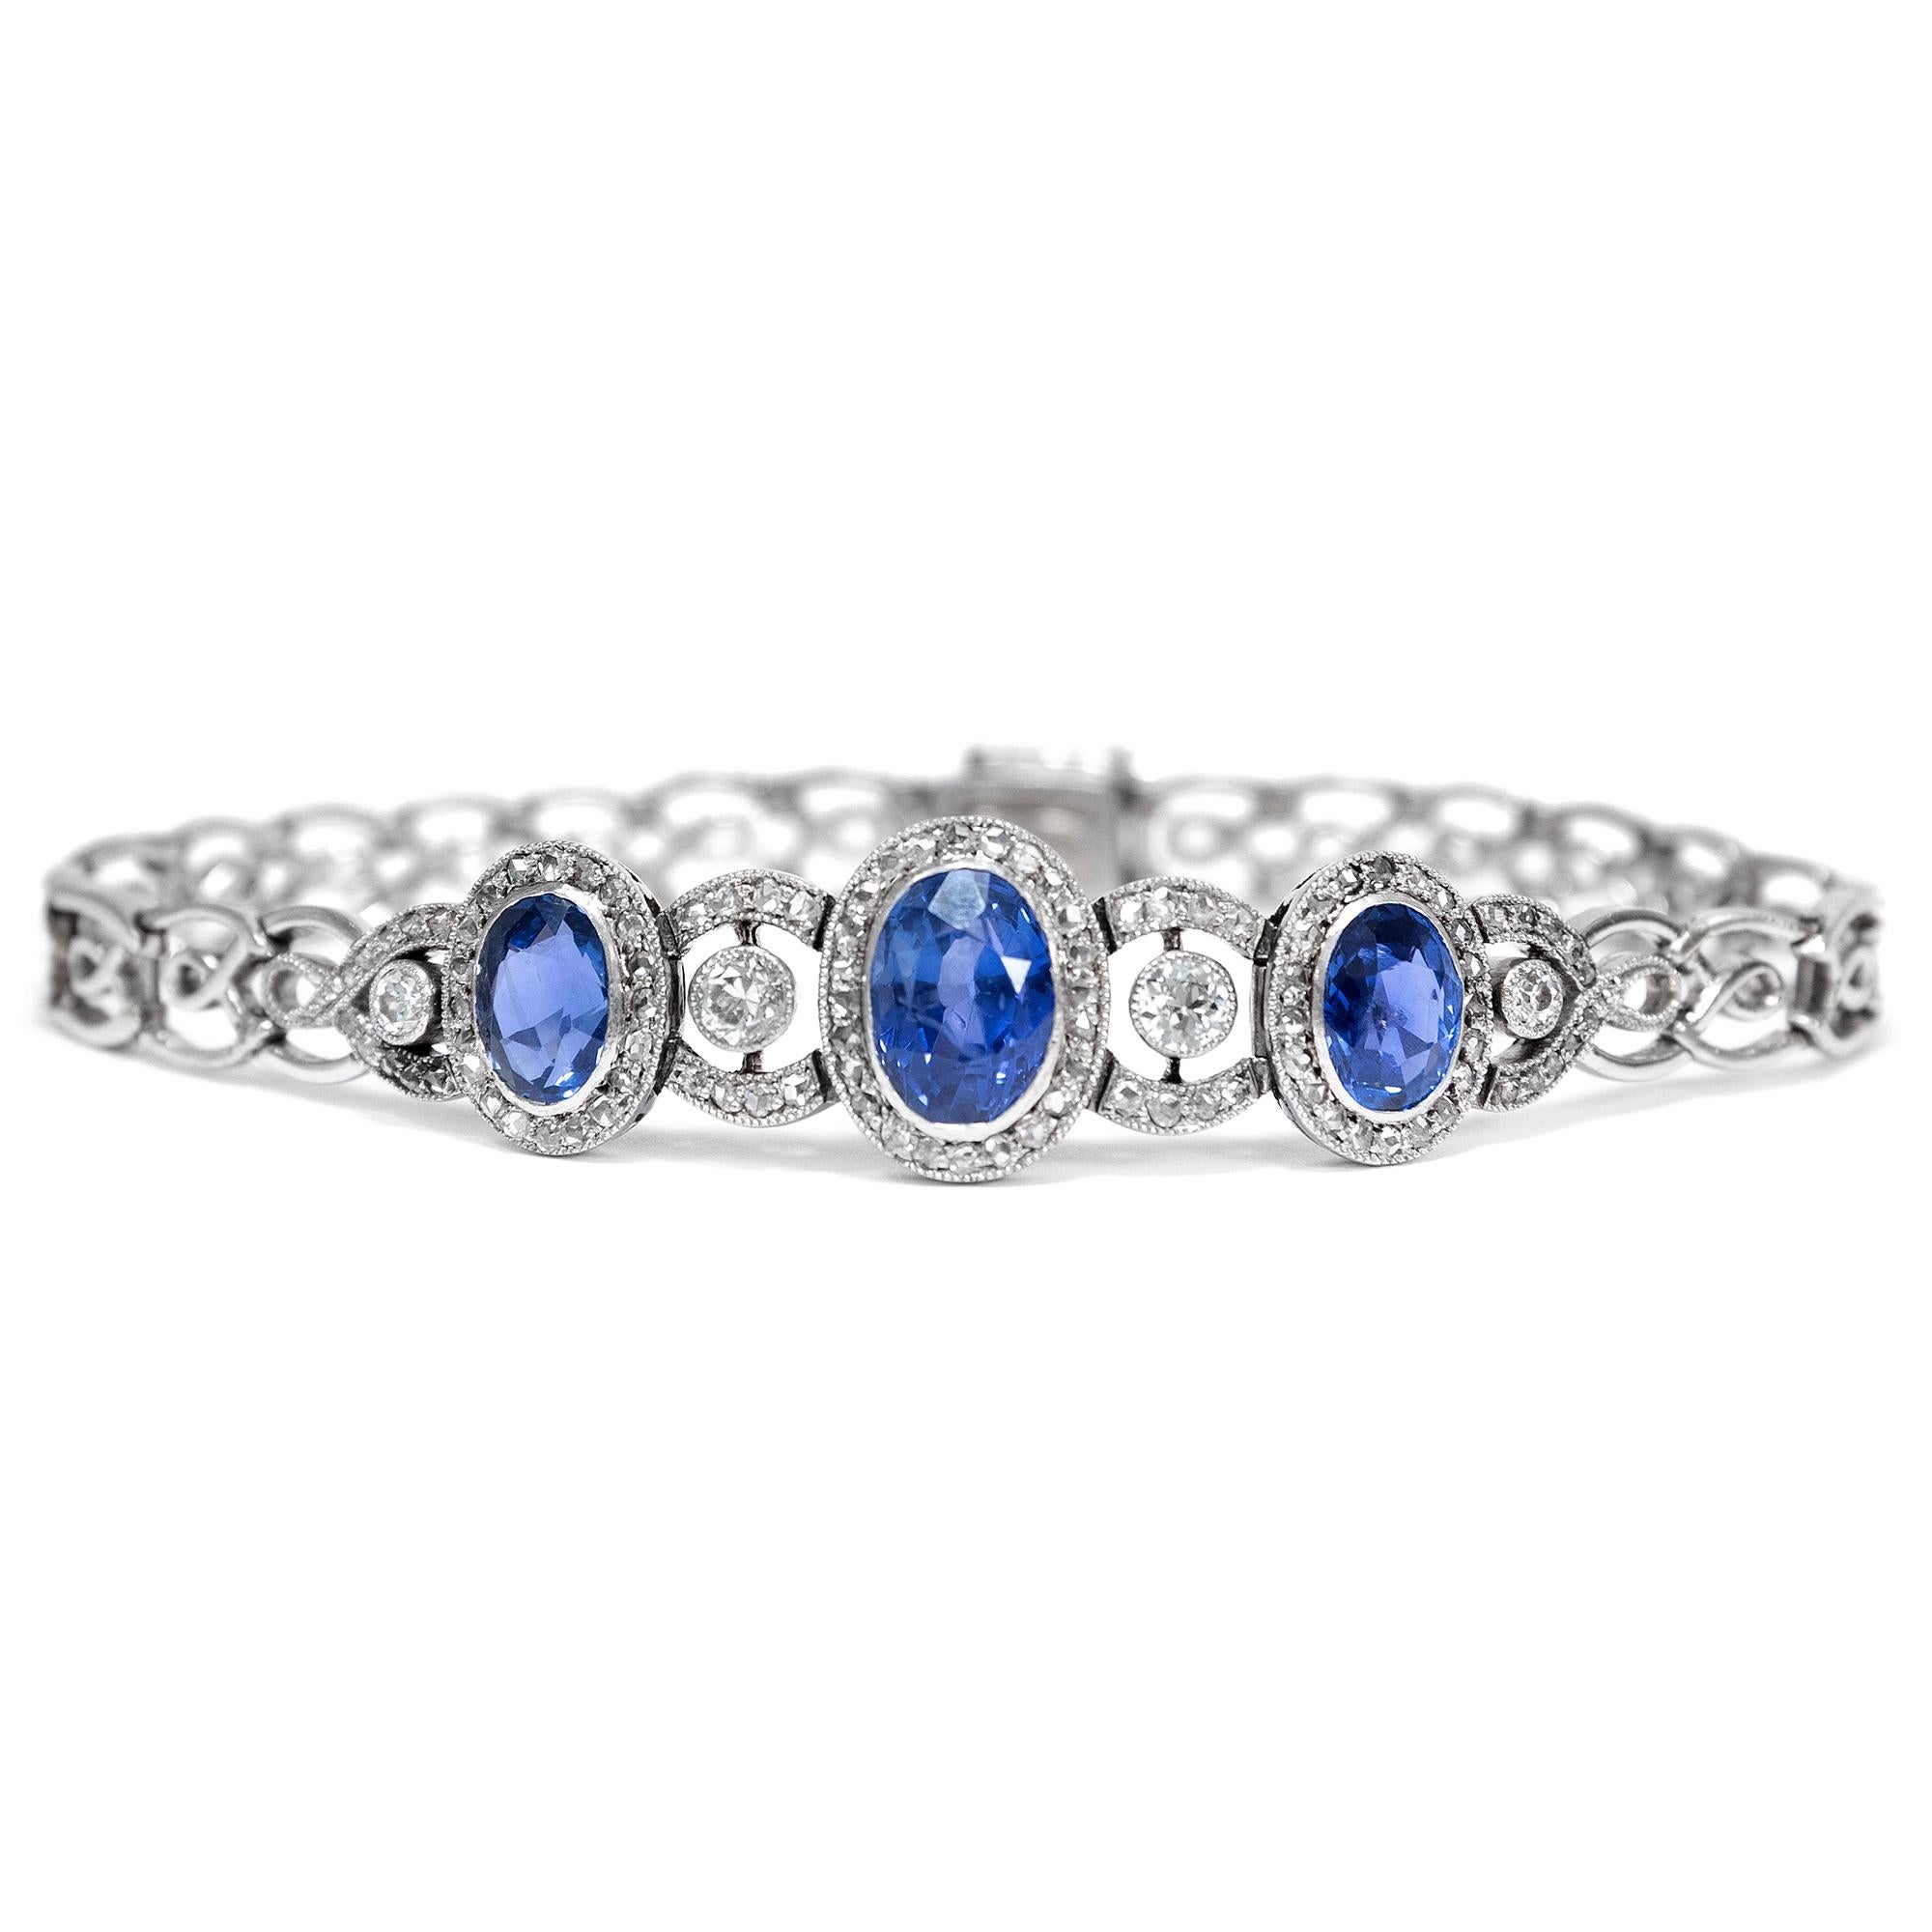 Untreated sapphires are a rarity in the world of fine jewellery: most sapphires have been heat-treated or filled to achieve the colour and transparency which they are loved for. These three sapphires, however, show a sublime blue colour and